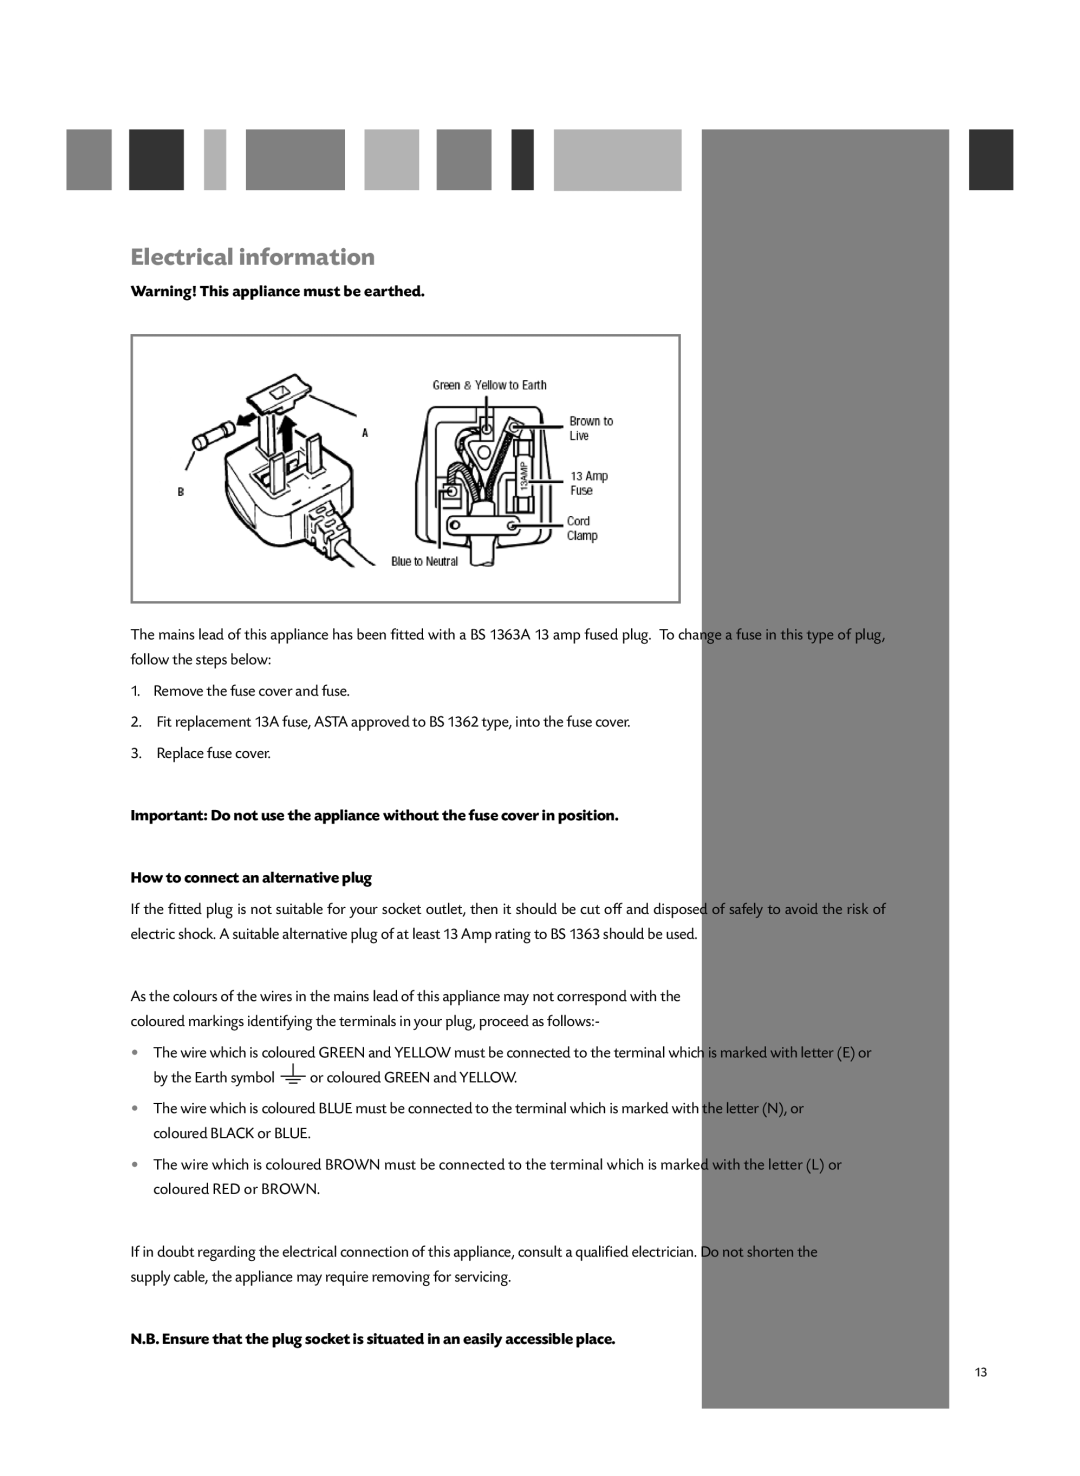 CDA WC430 manual Electrical information, Warning! This appliance must be earthed, How to connect an alternative plug 